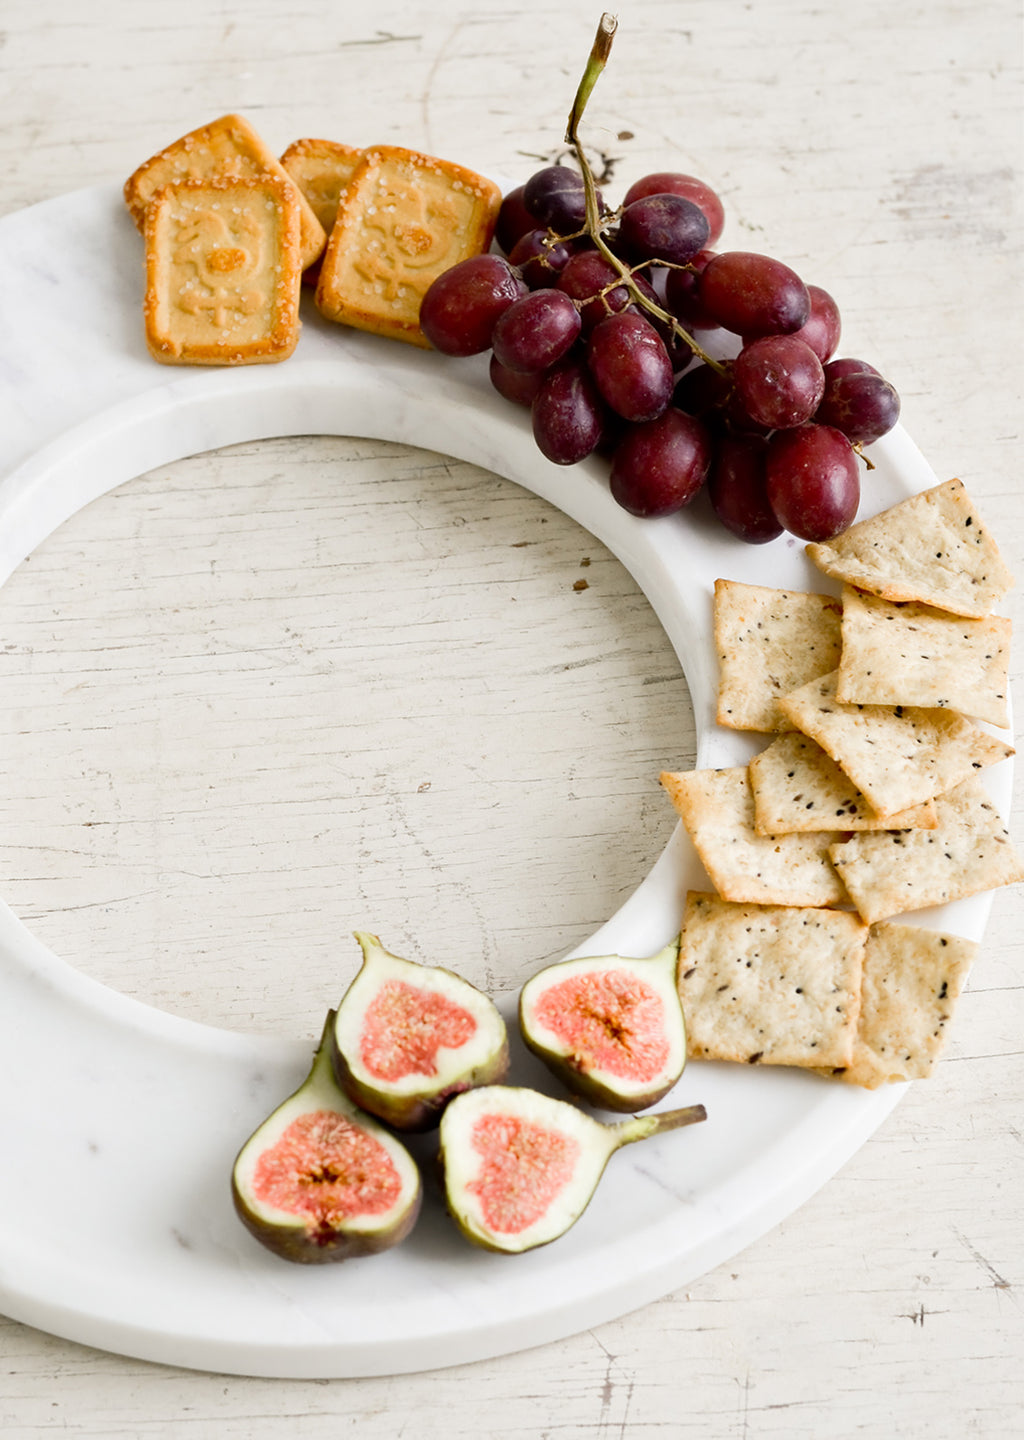 2: A circular white marble tray covered in crackers, grapes & figs.